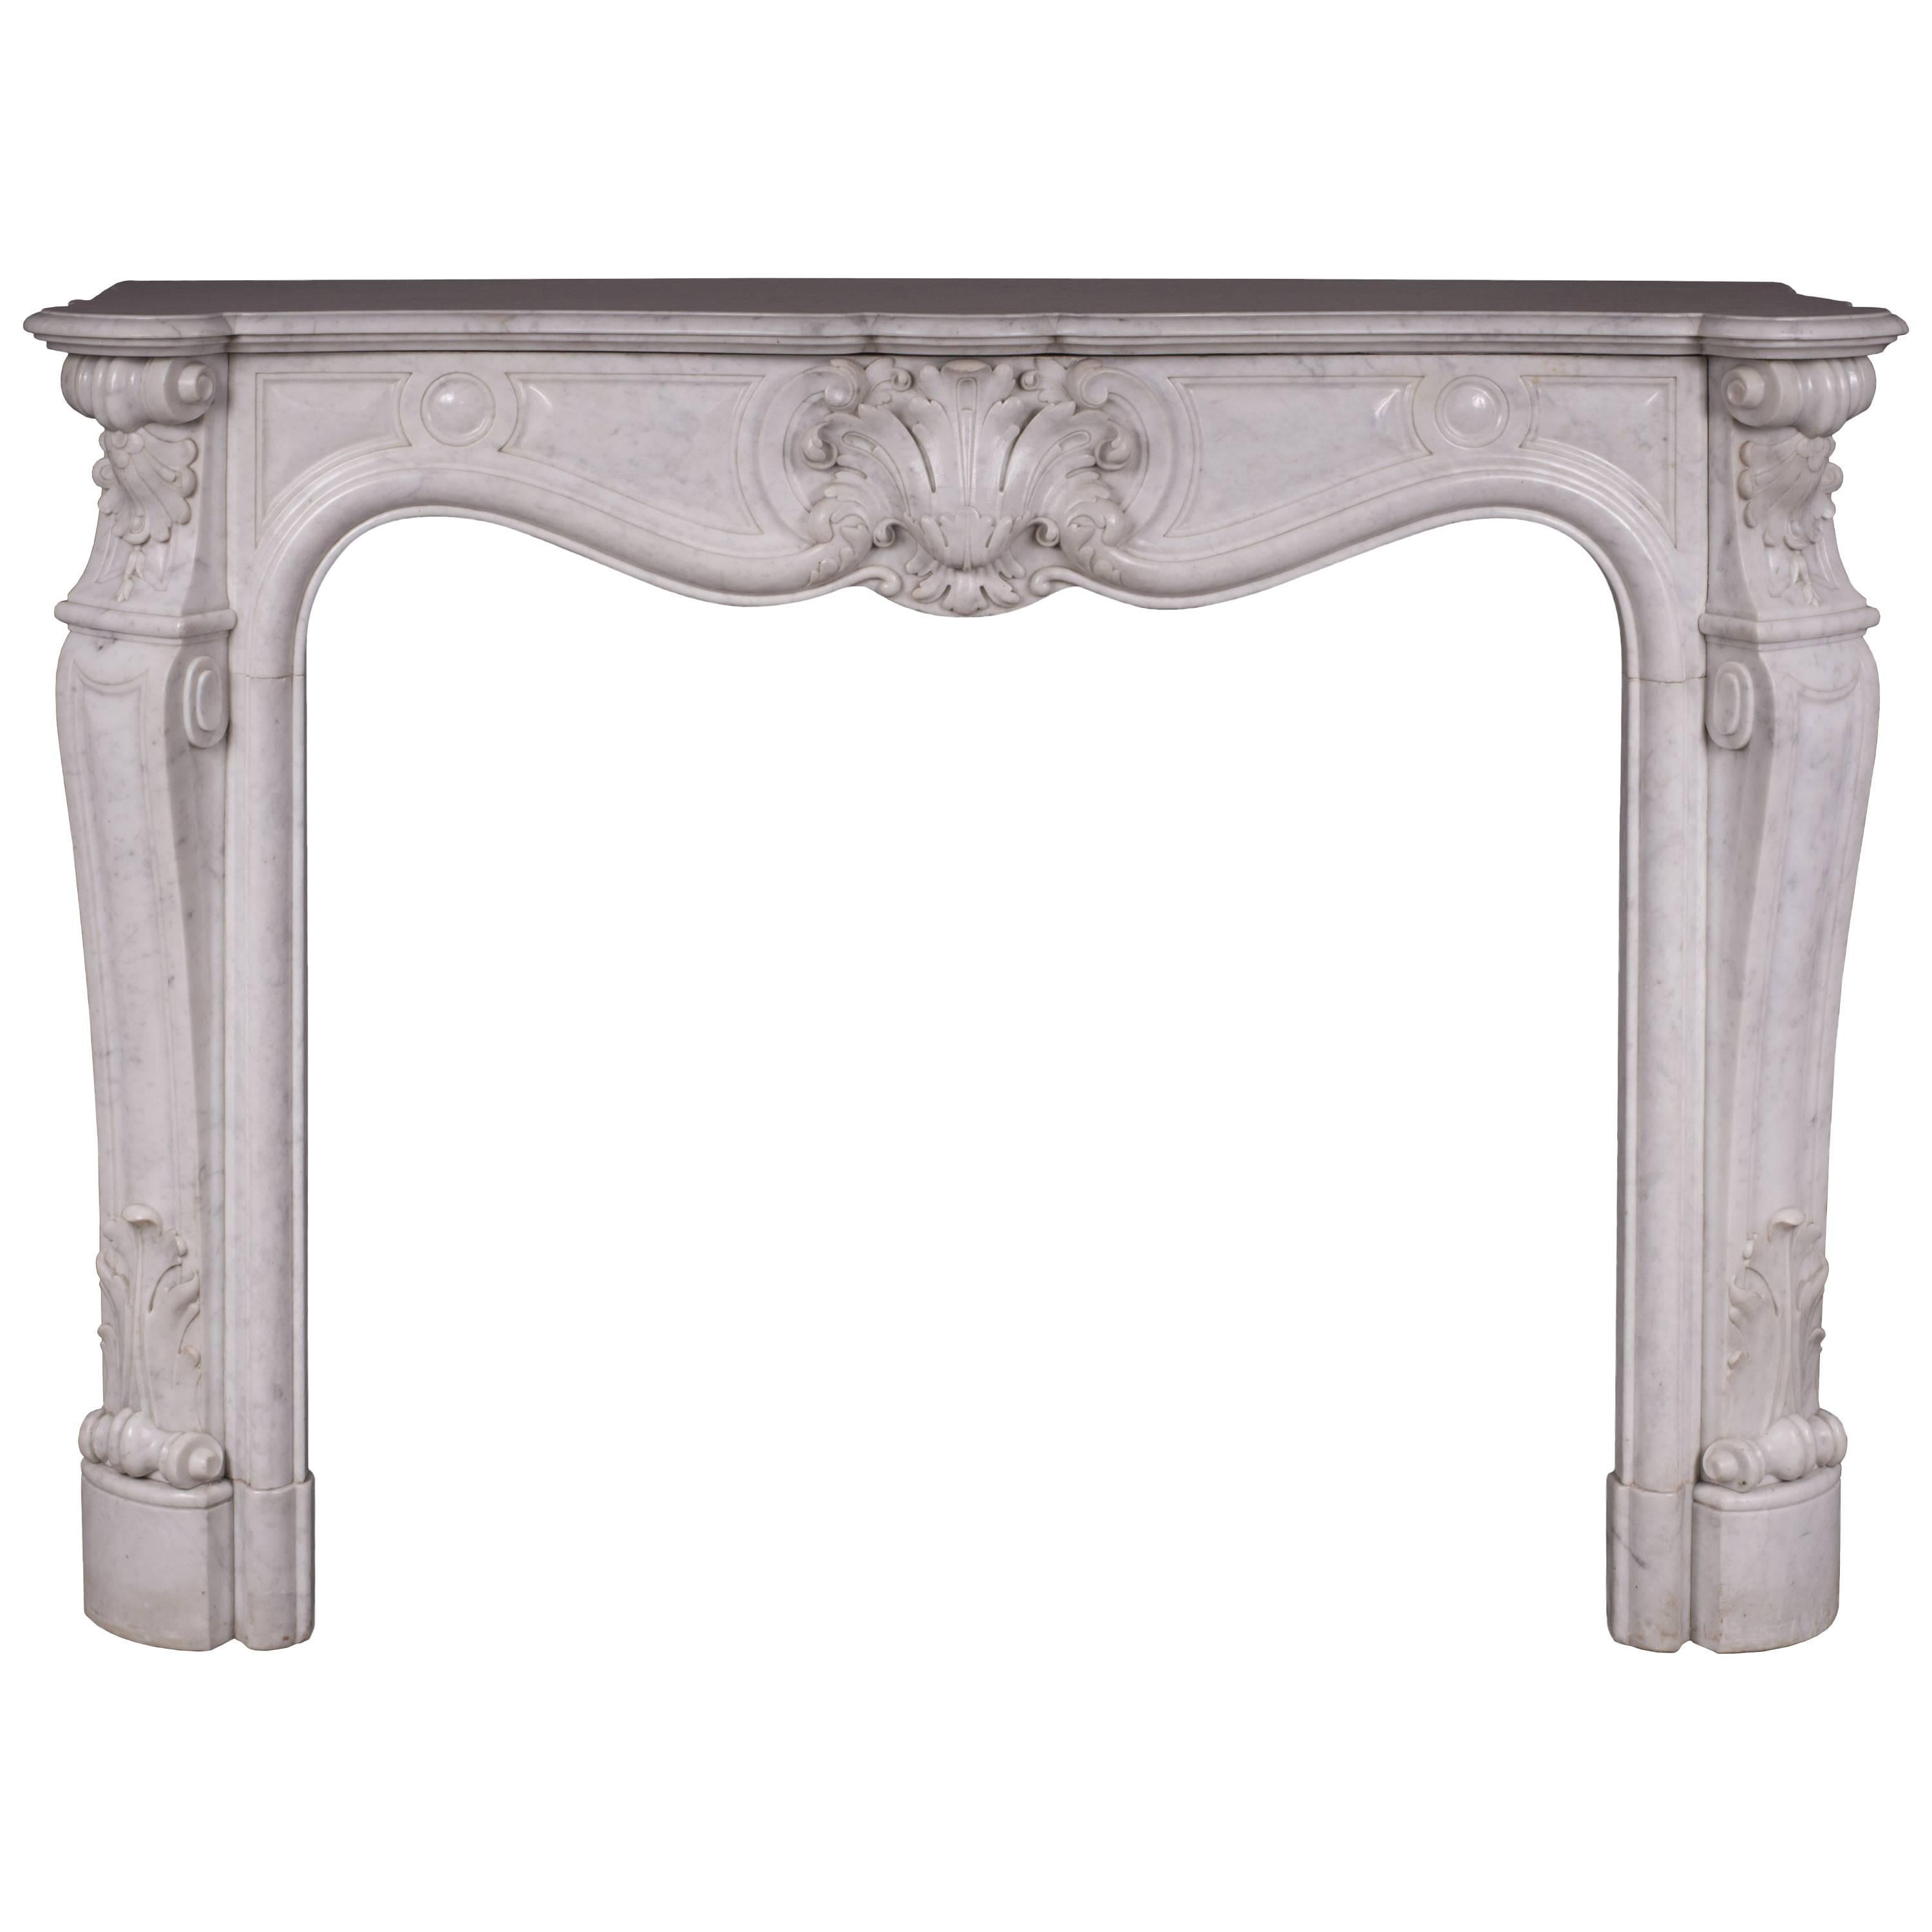 Antique Louis XV Style Fireplace in Carrara Marble with Large Shell For Sale